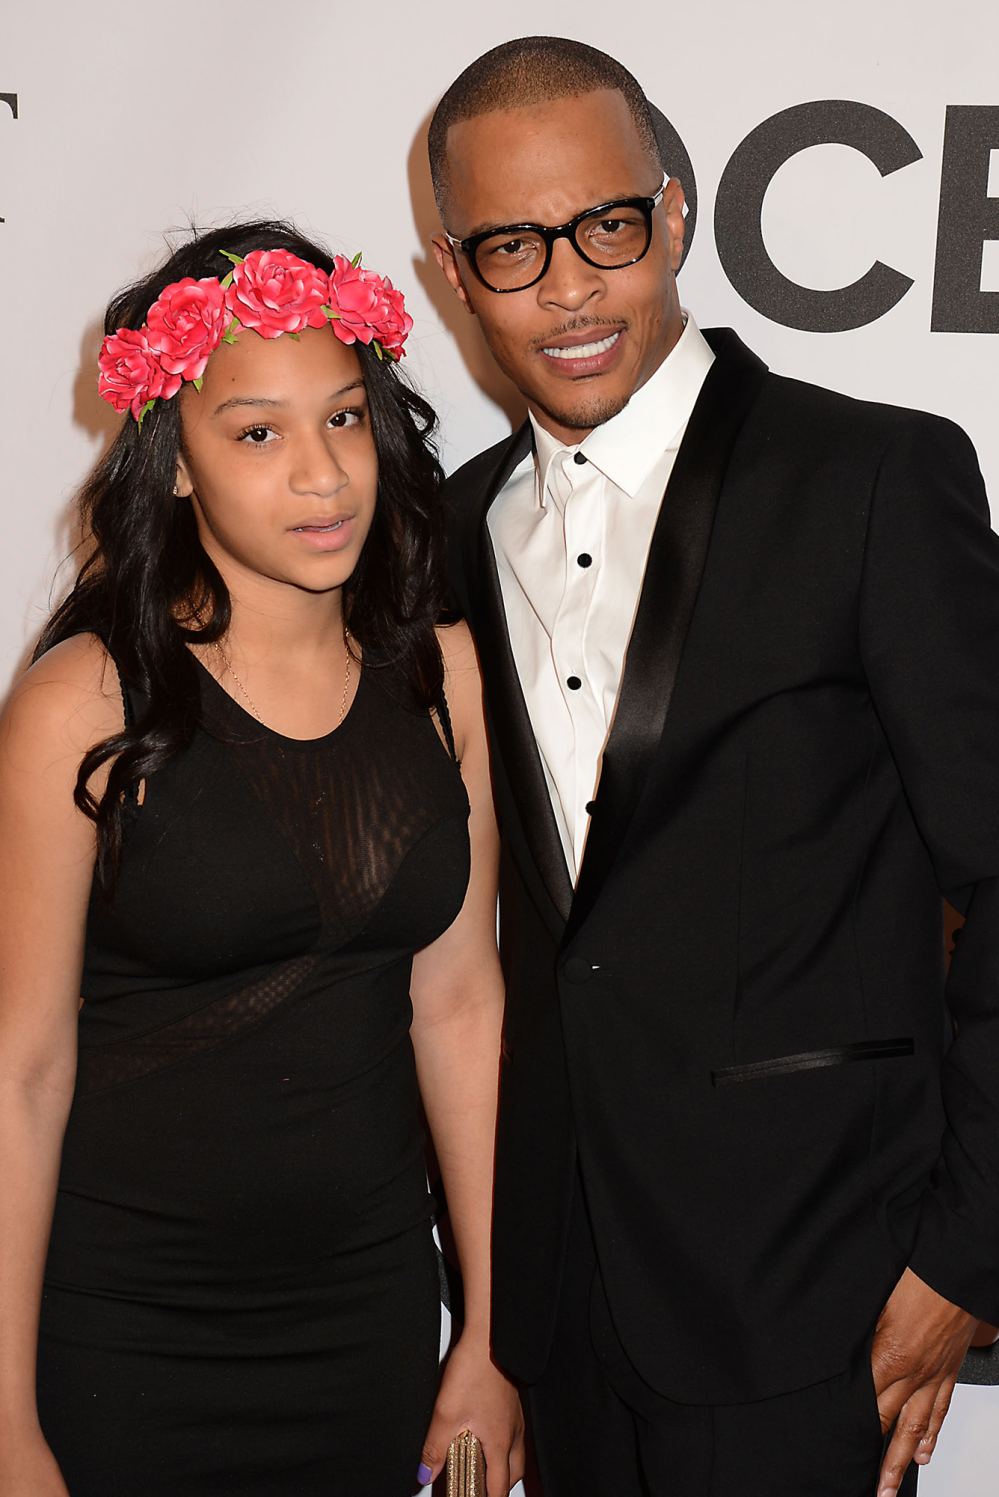 T.I.'s Daughter Deyjah Responds to Her Dad's Comments About Her Virginity